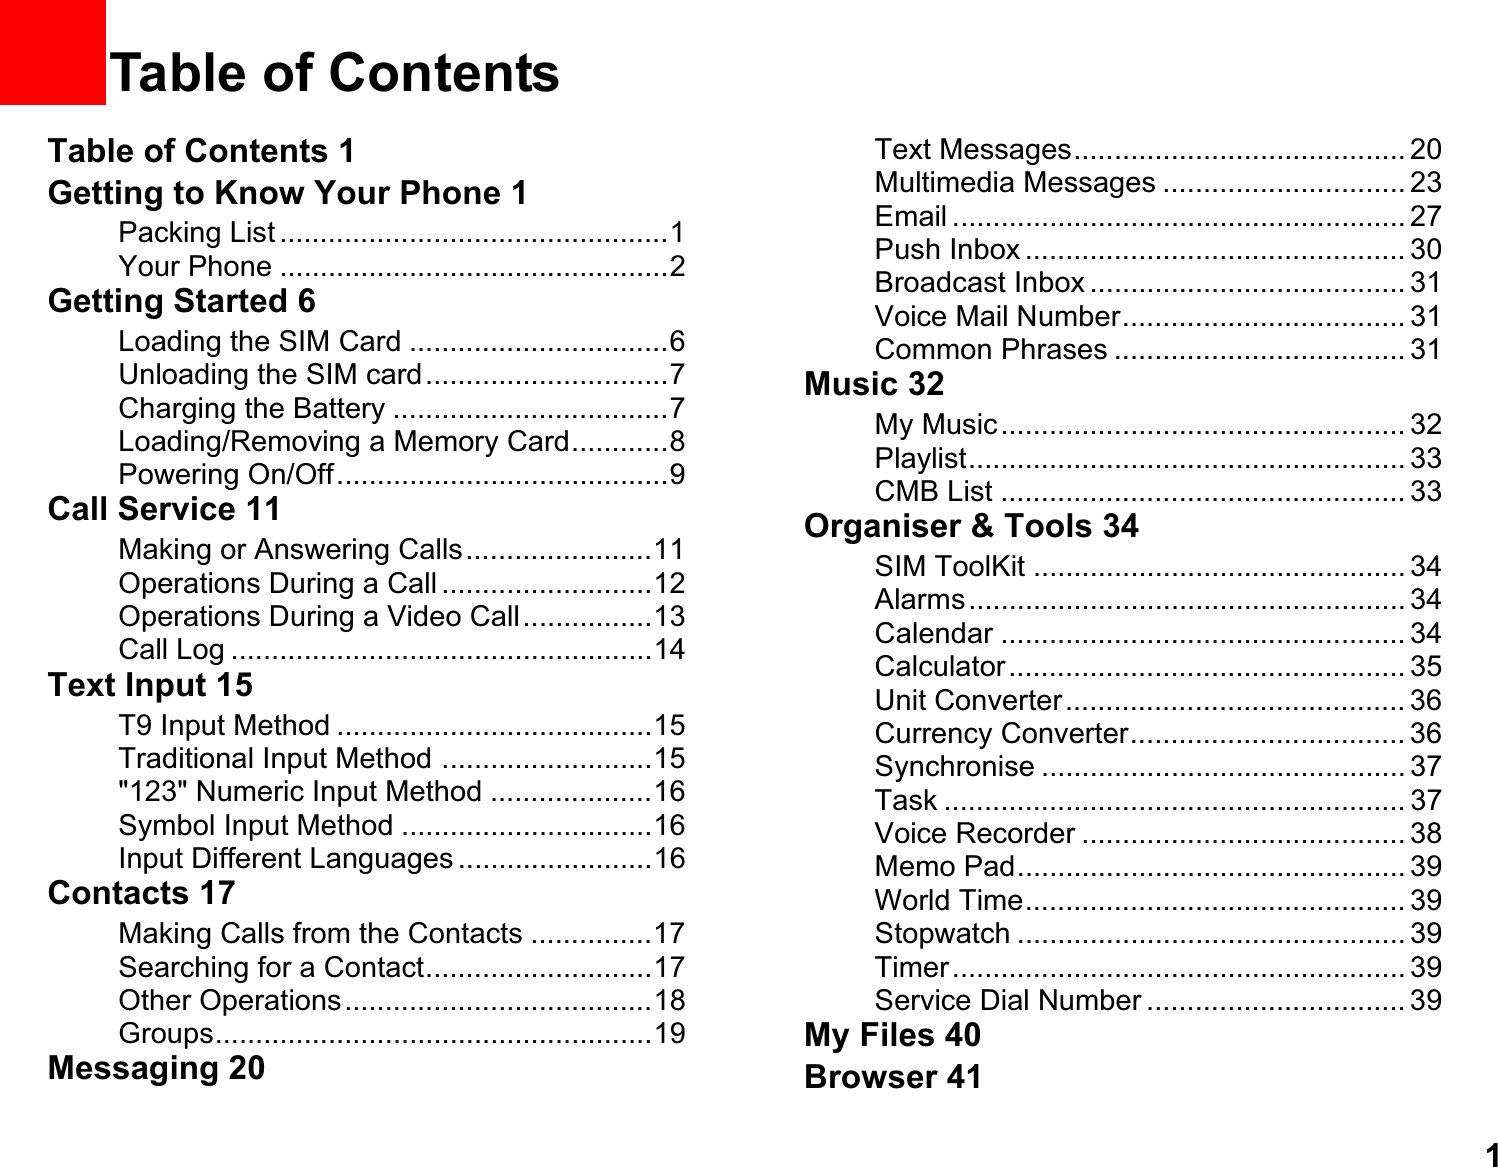 11Table of ContentsTable of Contents 1Getting to Know Your Phone 1Packing List ................................................1Your Phone ................................................2Getting Started 6Loading the SIM Card ................................6Unloading the SIM card..............................7Charging the Battery ..................................7Loading/Removing a Memory Card............8Powering On/Off.........................................9Call Service 11Making or Answering Calls.......................11Operations During a Call ..........................12Operations During a Video Call................13Call Log ....................................................14Text Input 15T9 Input Method .......................................15Traditional Input Method ..........................15&quot;123&quot; Numeric Input Method ....................16Symbol Input Method ...............................16Input Different Languages ........................16Contacts 17Making Calls from the Contacts ...............17Searching for a Contact............................17Other Operations......................................18Groups......................................................19Messaging 20Text Messages......................................... 20Multimedia Messages .............................. 23Email ........................................................ 27Push Inbox ............................................... 30Broadcast Inbox ....................................... 31Voice Mail Number................................... 31Common Phrases .................................... 31Music 32My Music.................................................. 32Playlist...................................................... 33CMB List .................................................. 33Organiser &amp; Tools 34SIM ToolKit .............................................. 34Alarms...................................................... 34Calendar .................................................. 34Calculator................................................. 35Unit Converter.......................................... 36Currency Converter.................................. 36Synchronise ............................................. 37Task ......................................................... 37Voice Recorder ........................................ 38Memo Pad................................................ 39World Time............................................... 39Stopwatch ................................................ 39Timer........................................................ 39Service Dial Number ................................ 39My Files 40Browser 41